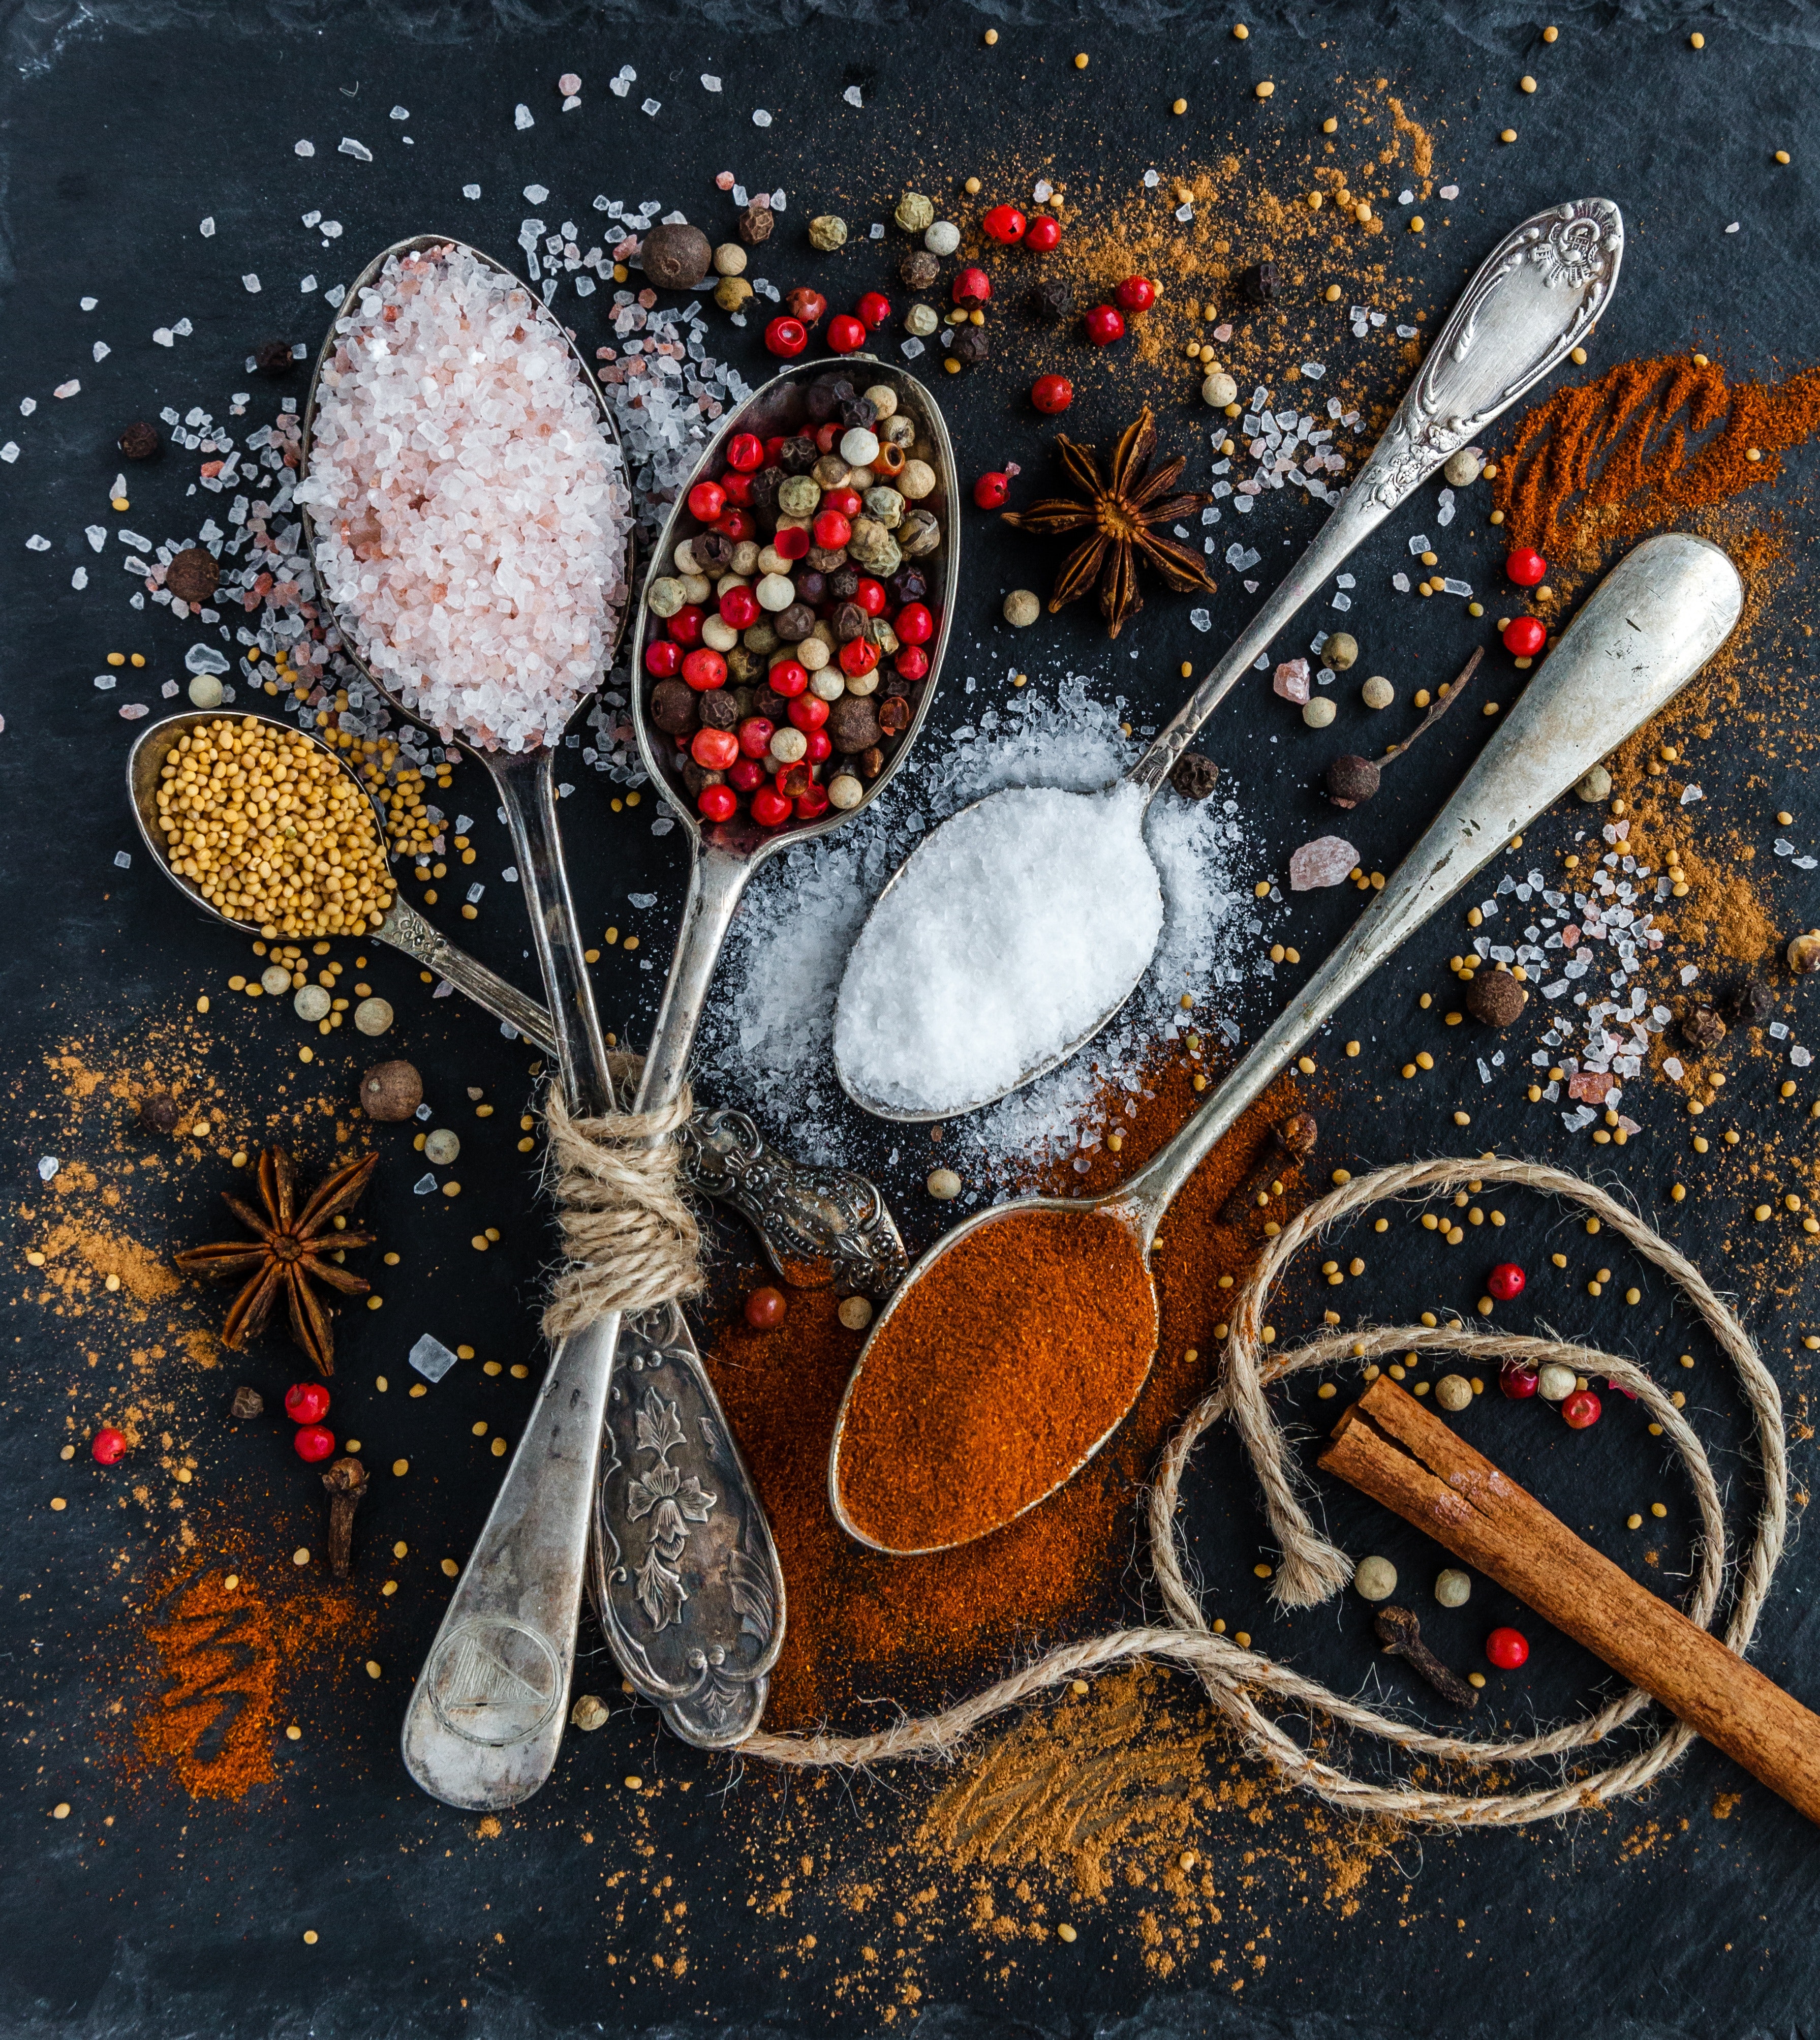 Dry spices and salts